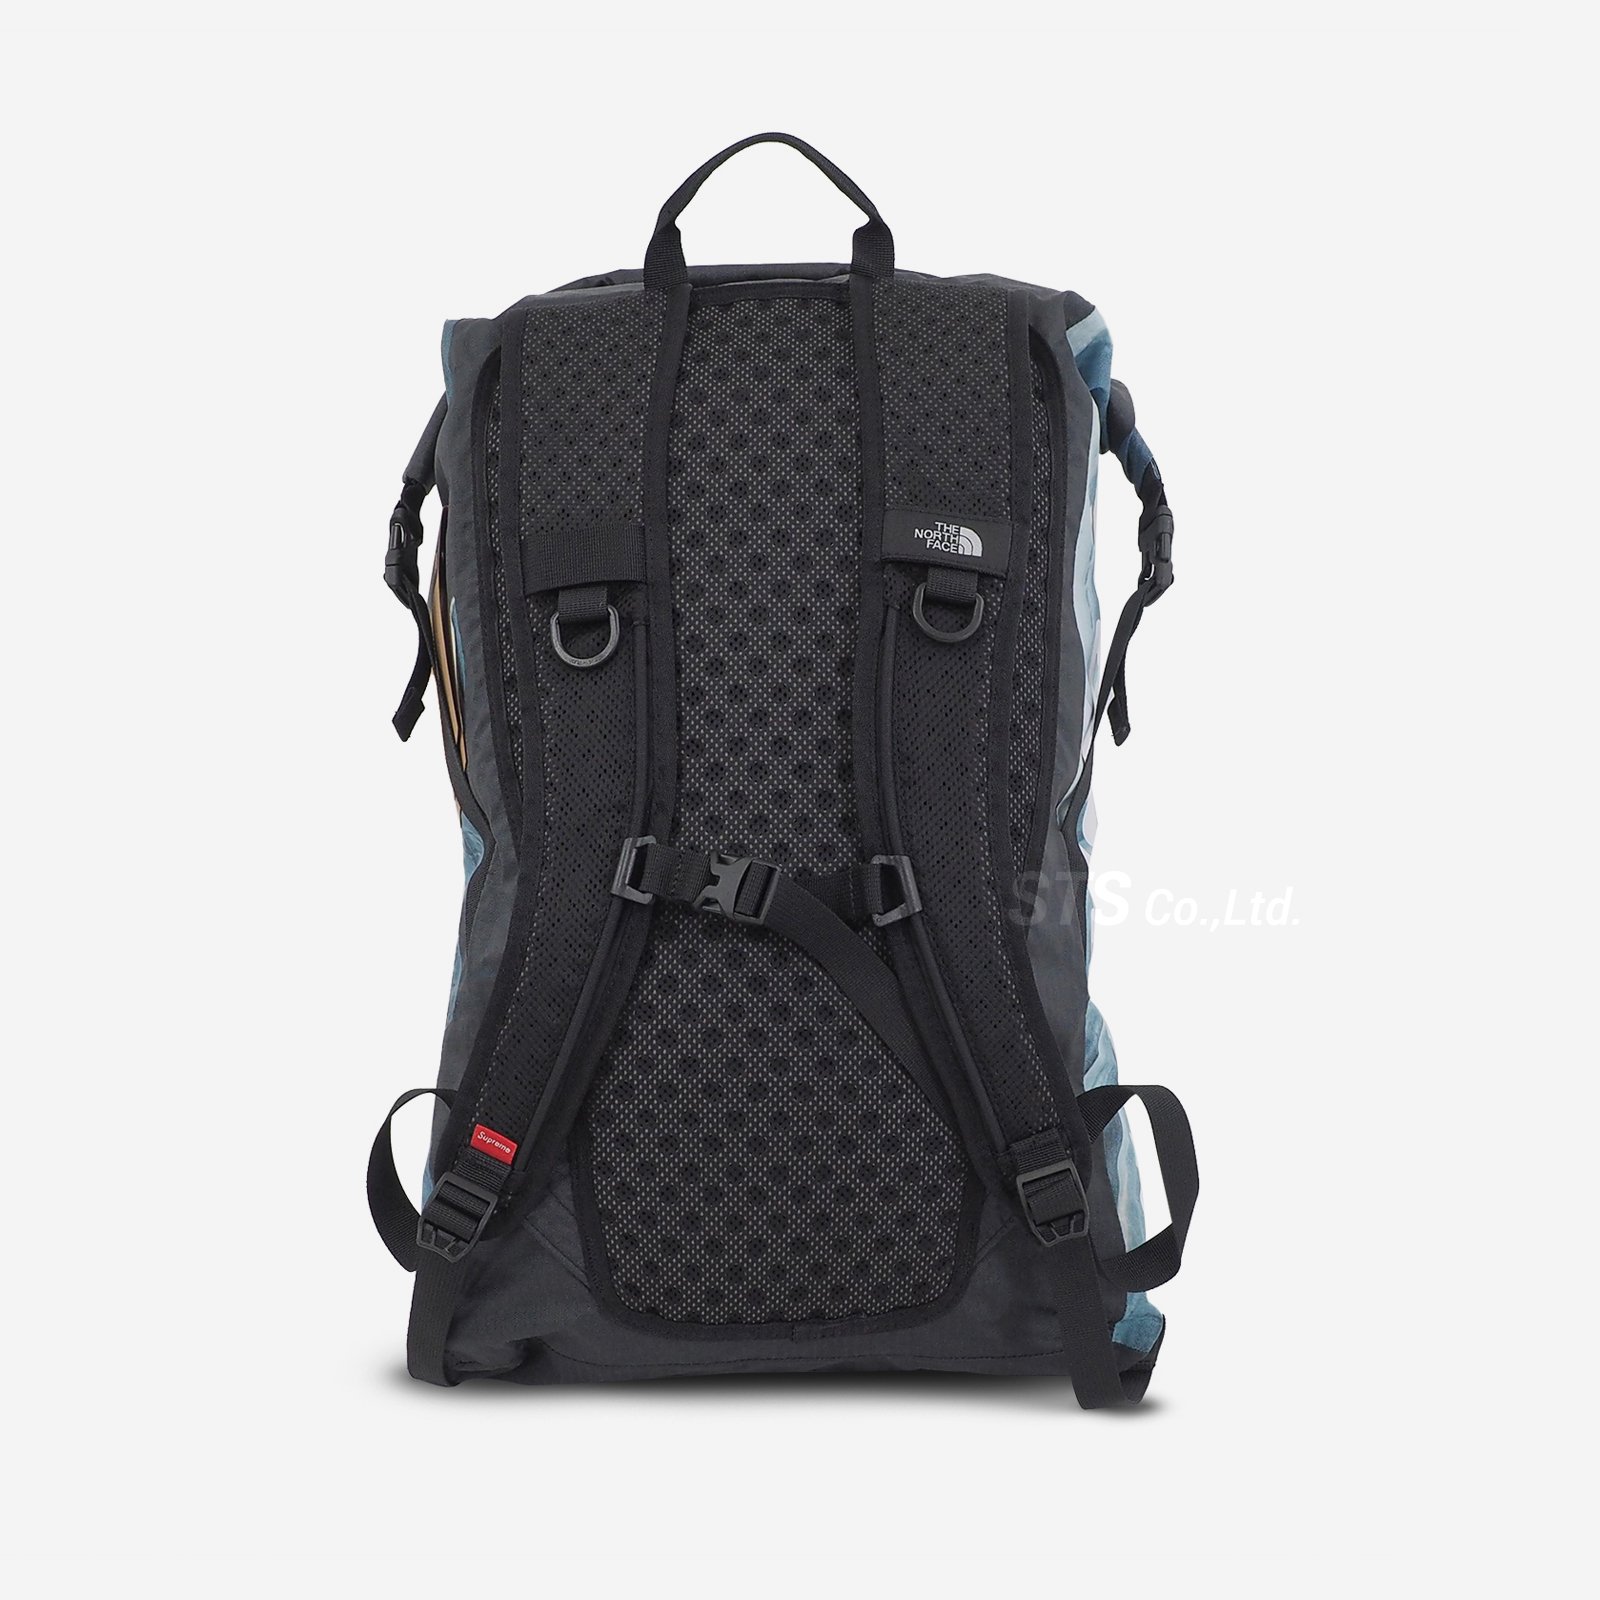 Supreme/The North Face Statue of Liberty Waterproof Backpack - UG ...